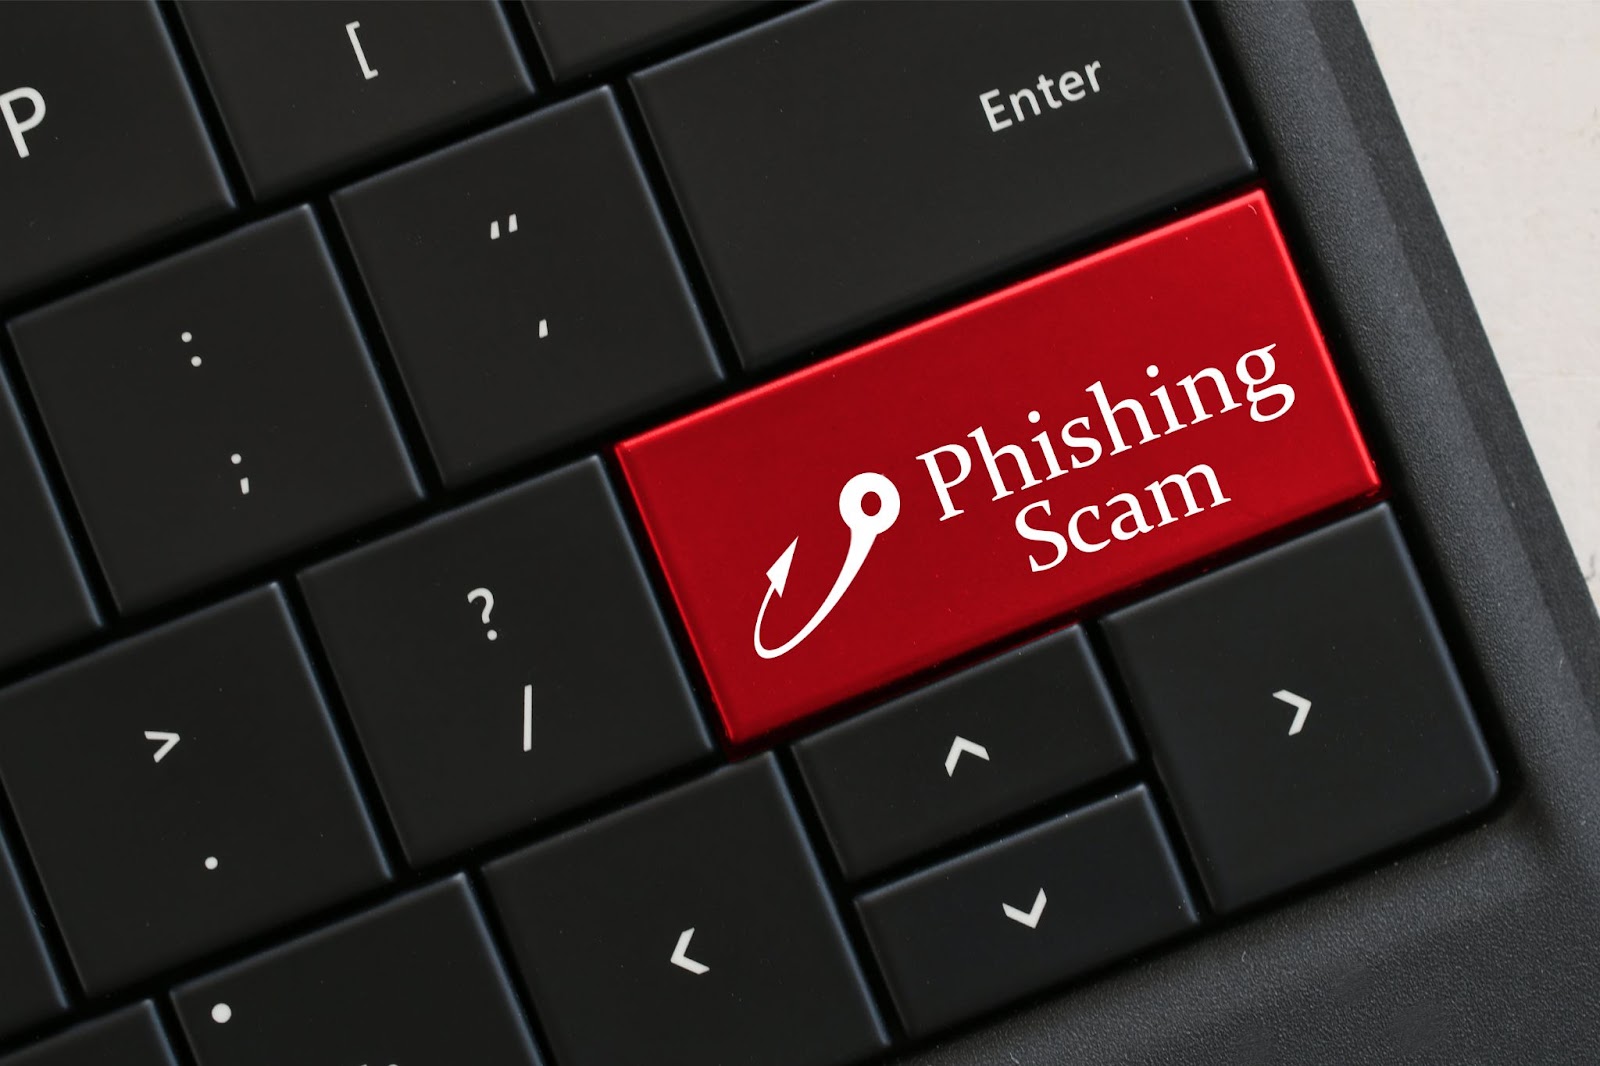  Beware of phishing scam emails by using cyber awareness.